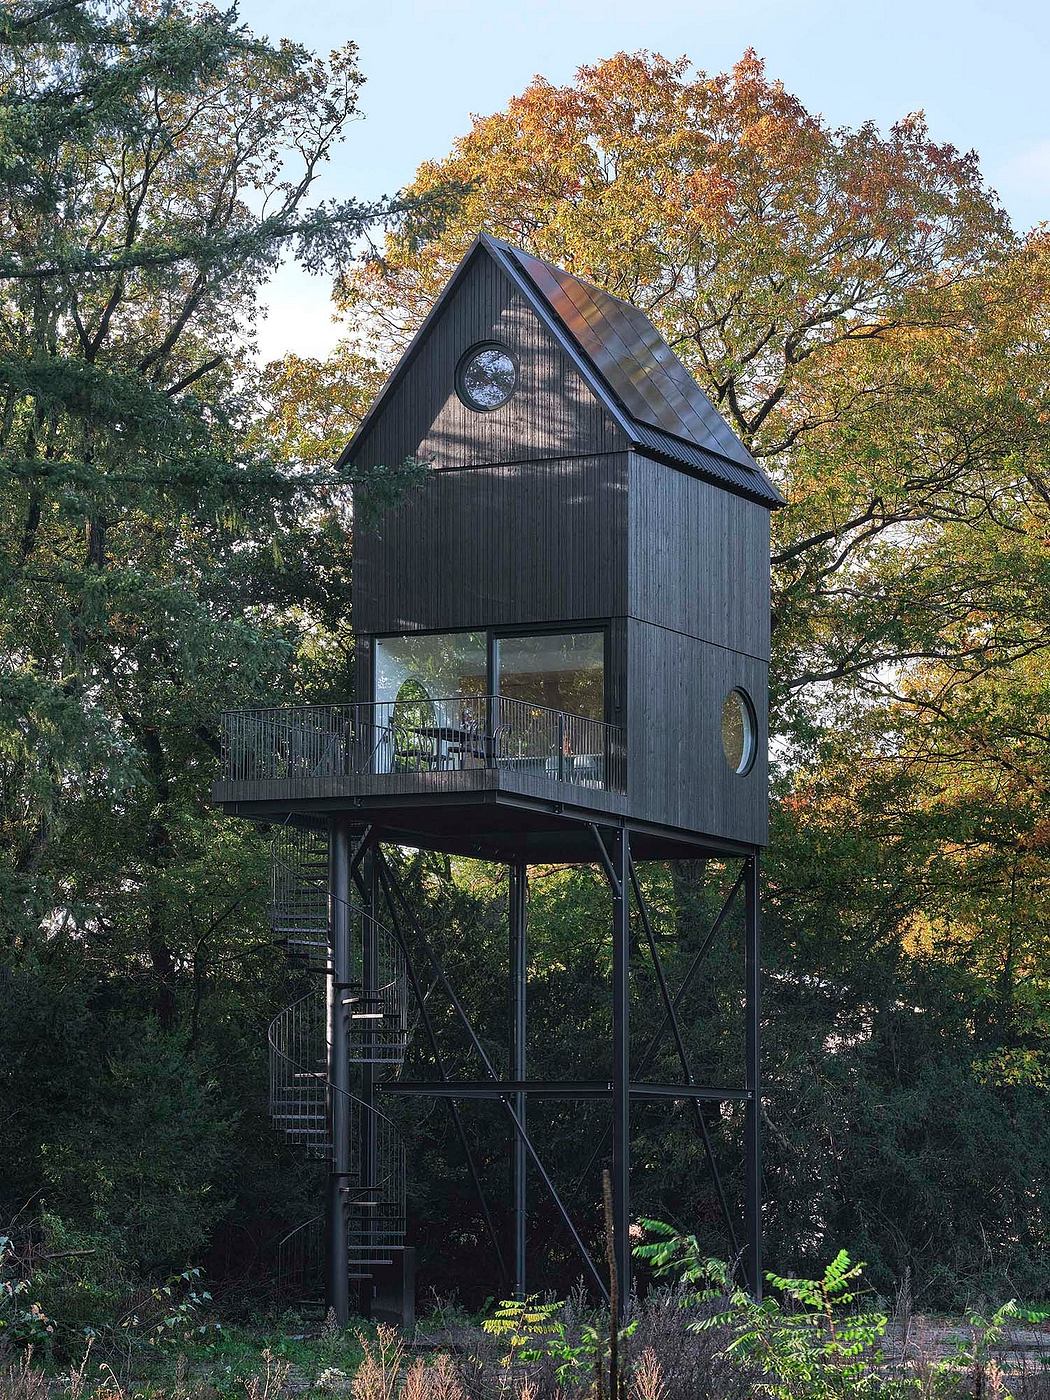 Elevated, slender cabin with a gabled roof amid trees.